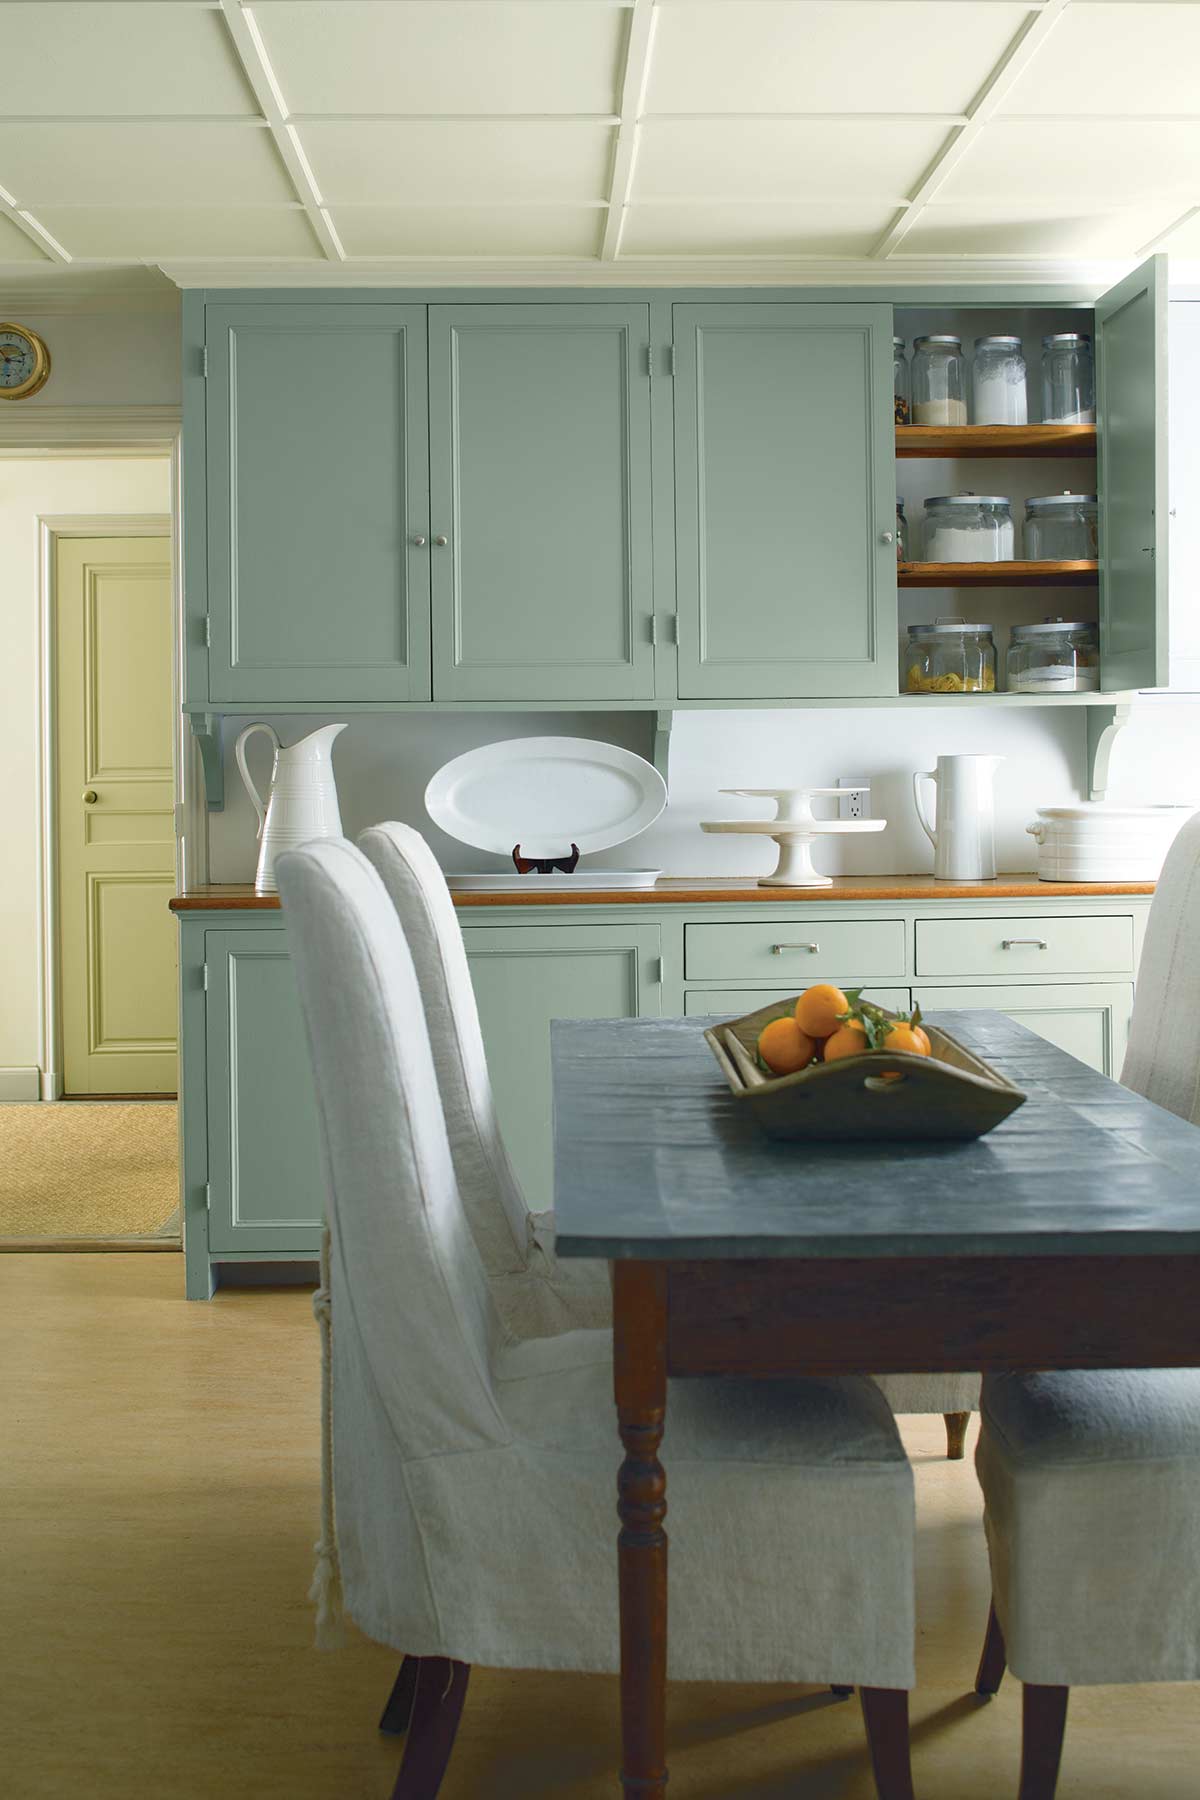 chairs around a kitchen table with fruit bowl centrepiece and light green cupboards as a backdrop